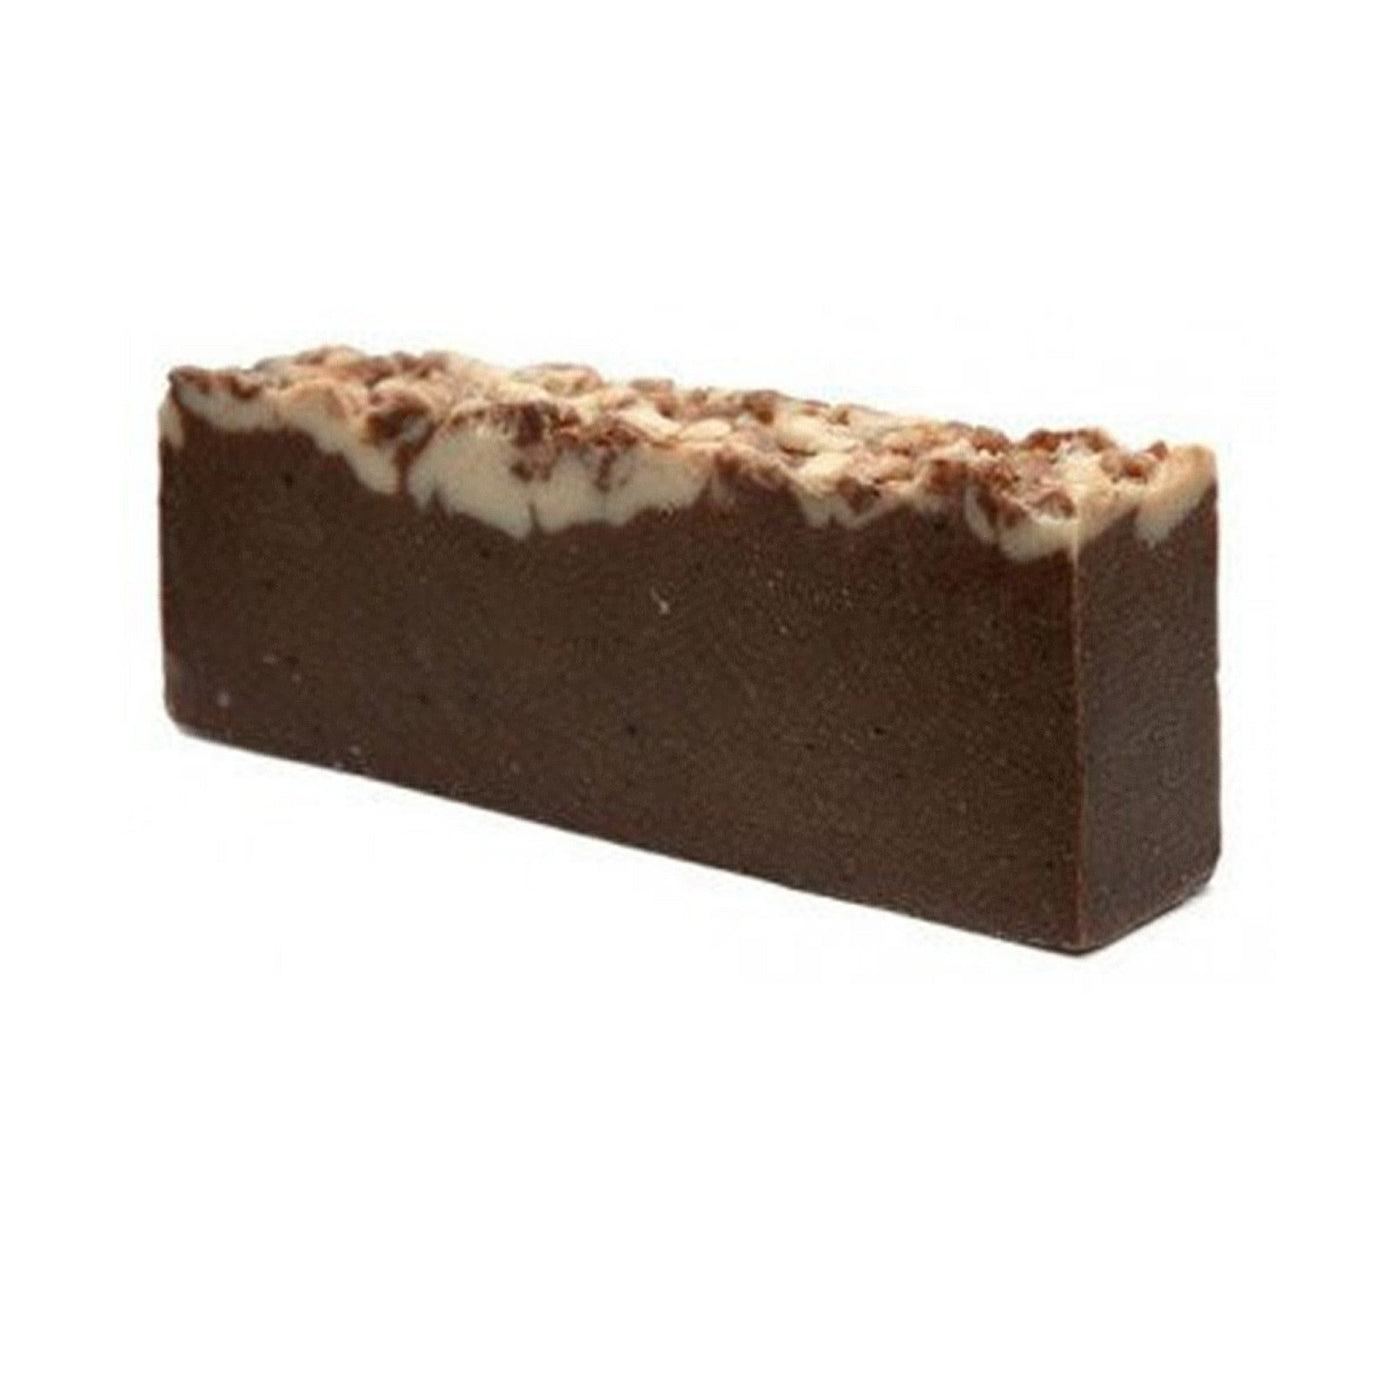 Chocolate Paraben Free Olive Oil Soap Loaf And Slices.